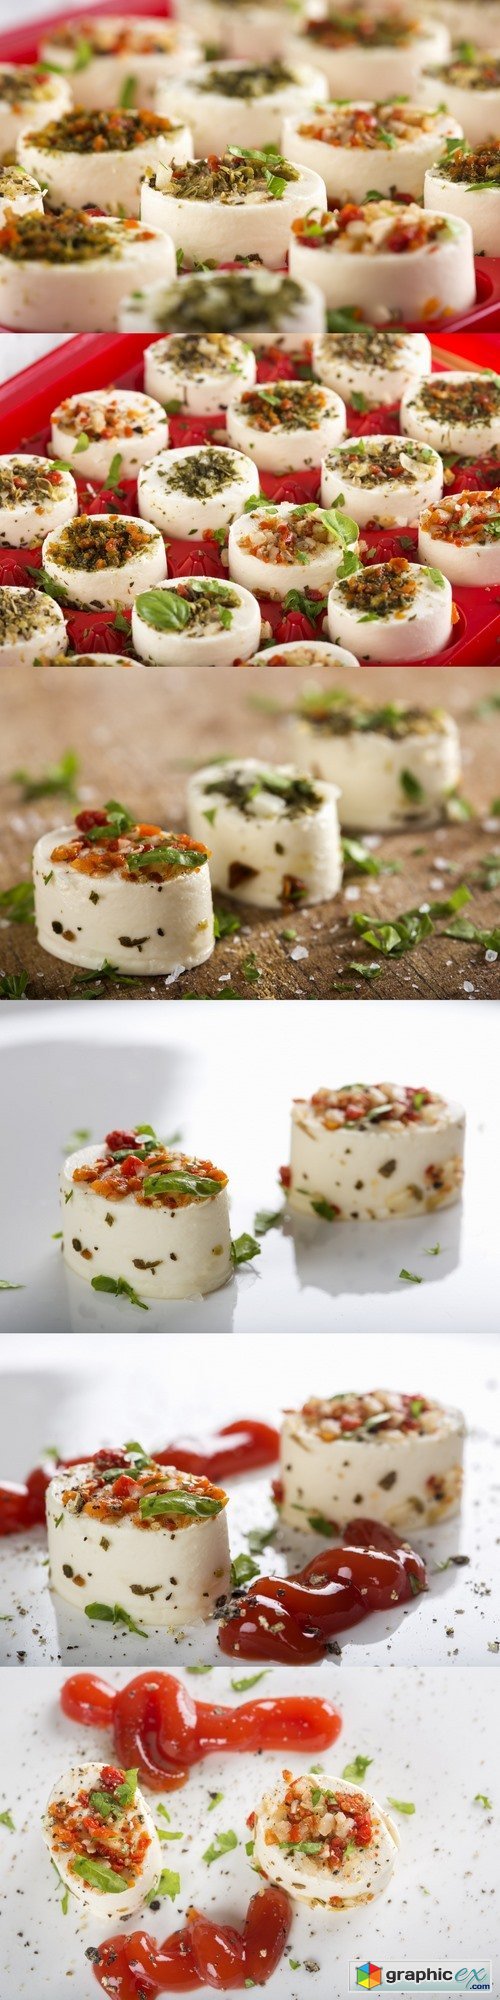 Appetizers with cheese and various ingredients